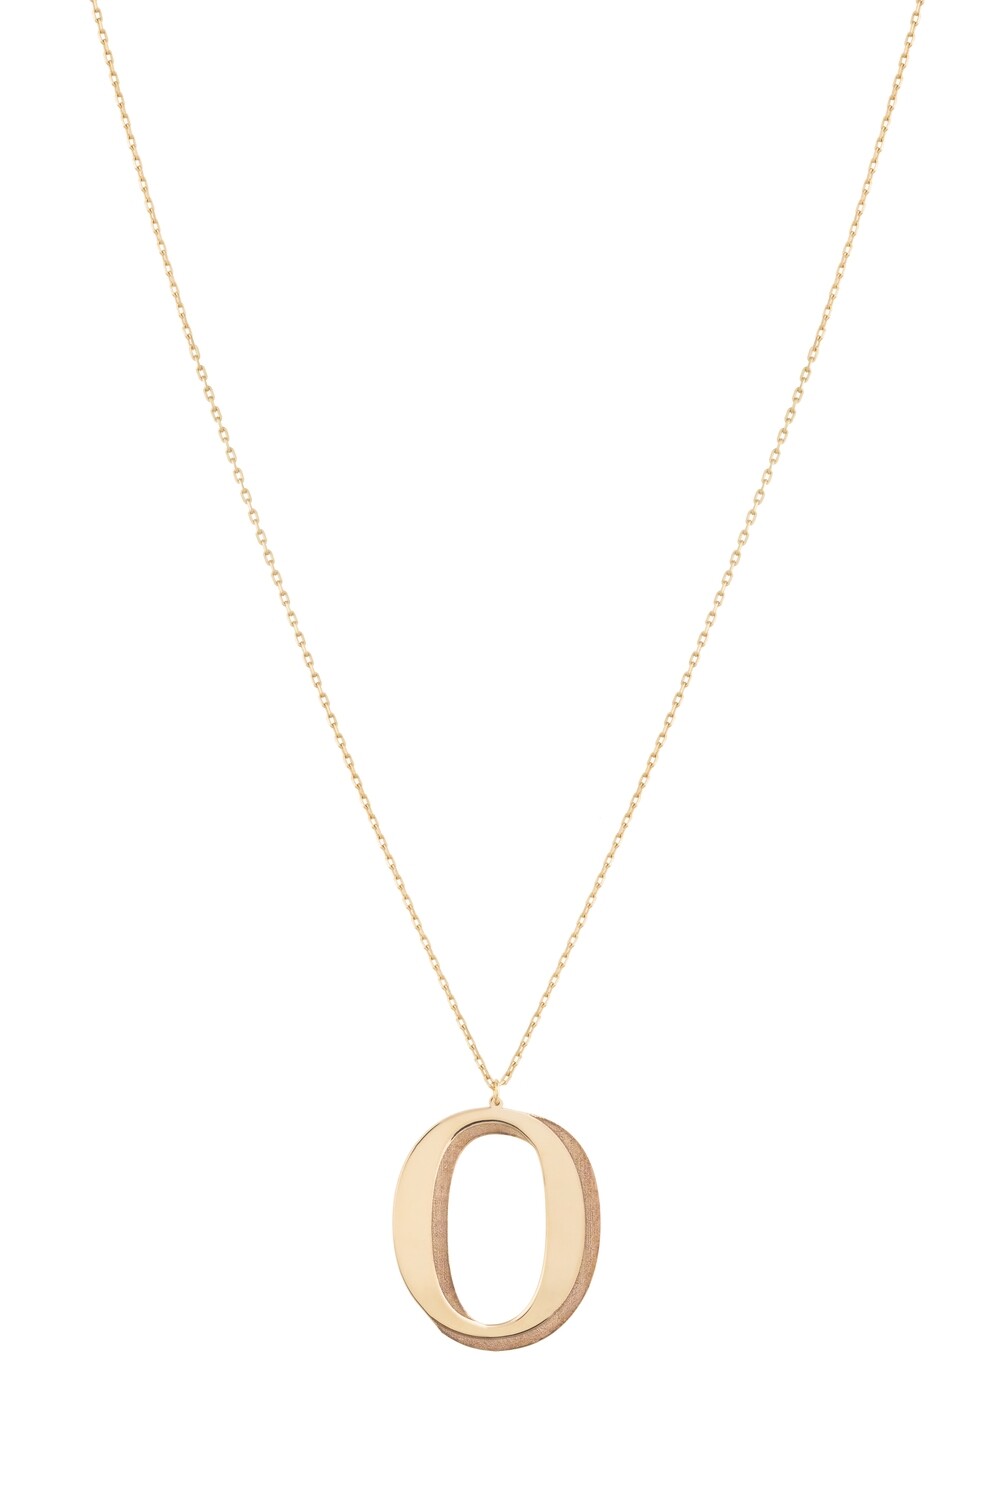 Initials Gold Necklace Letter O